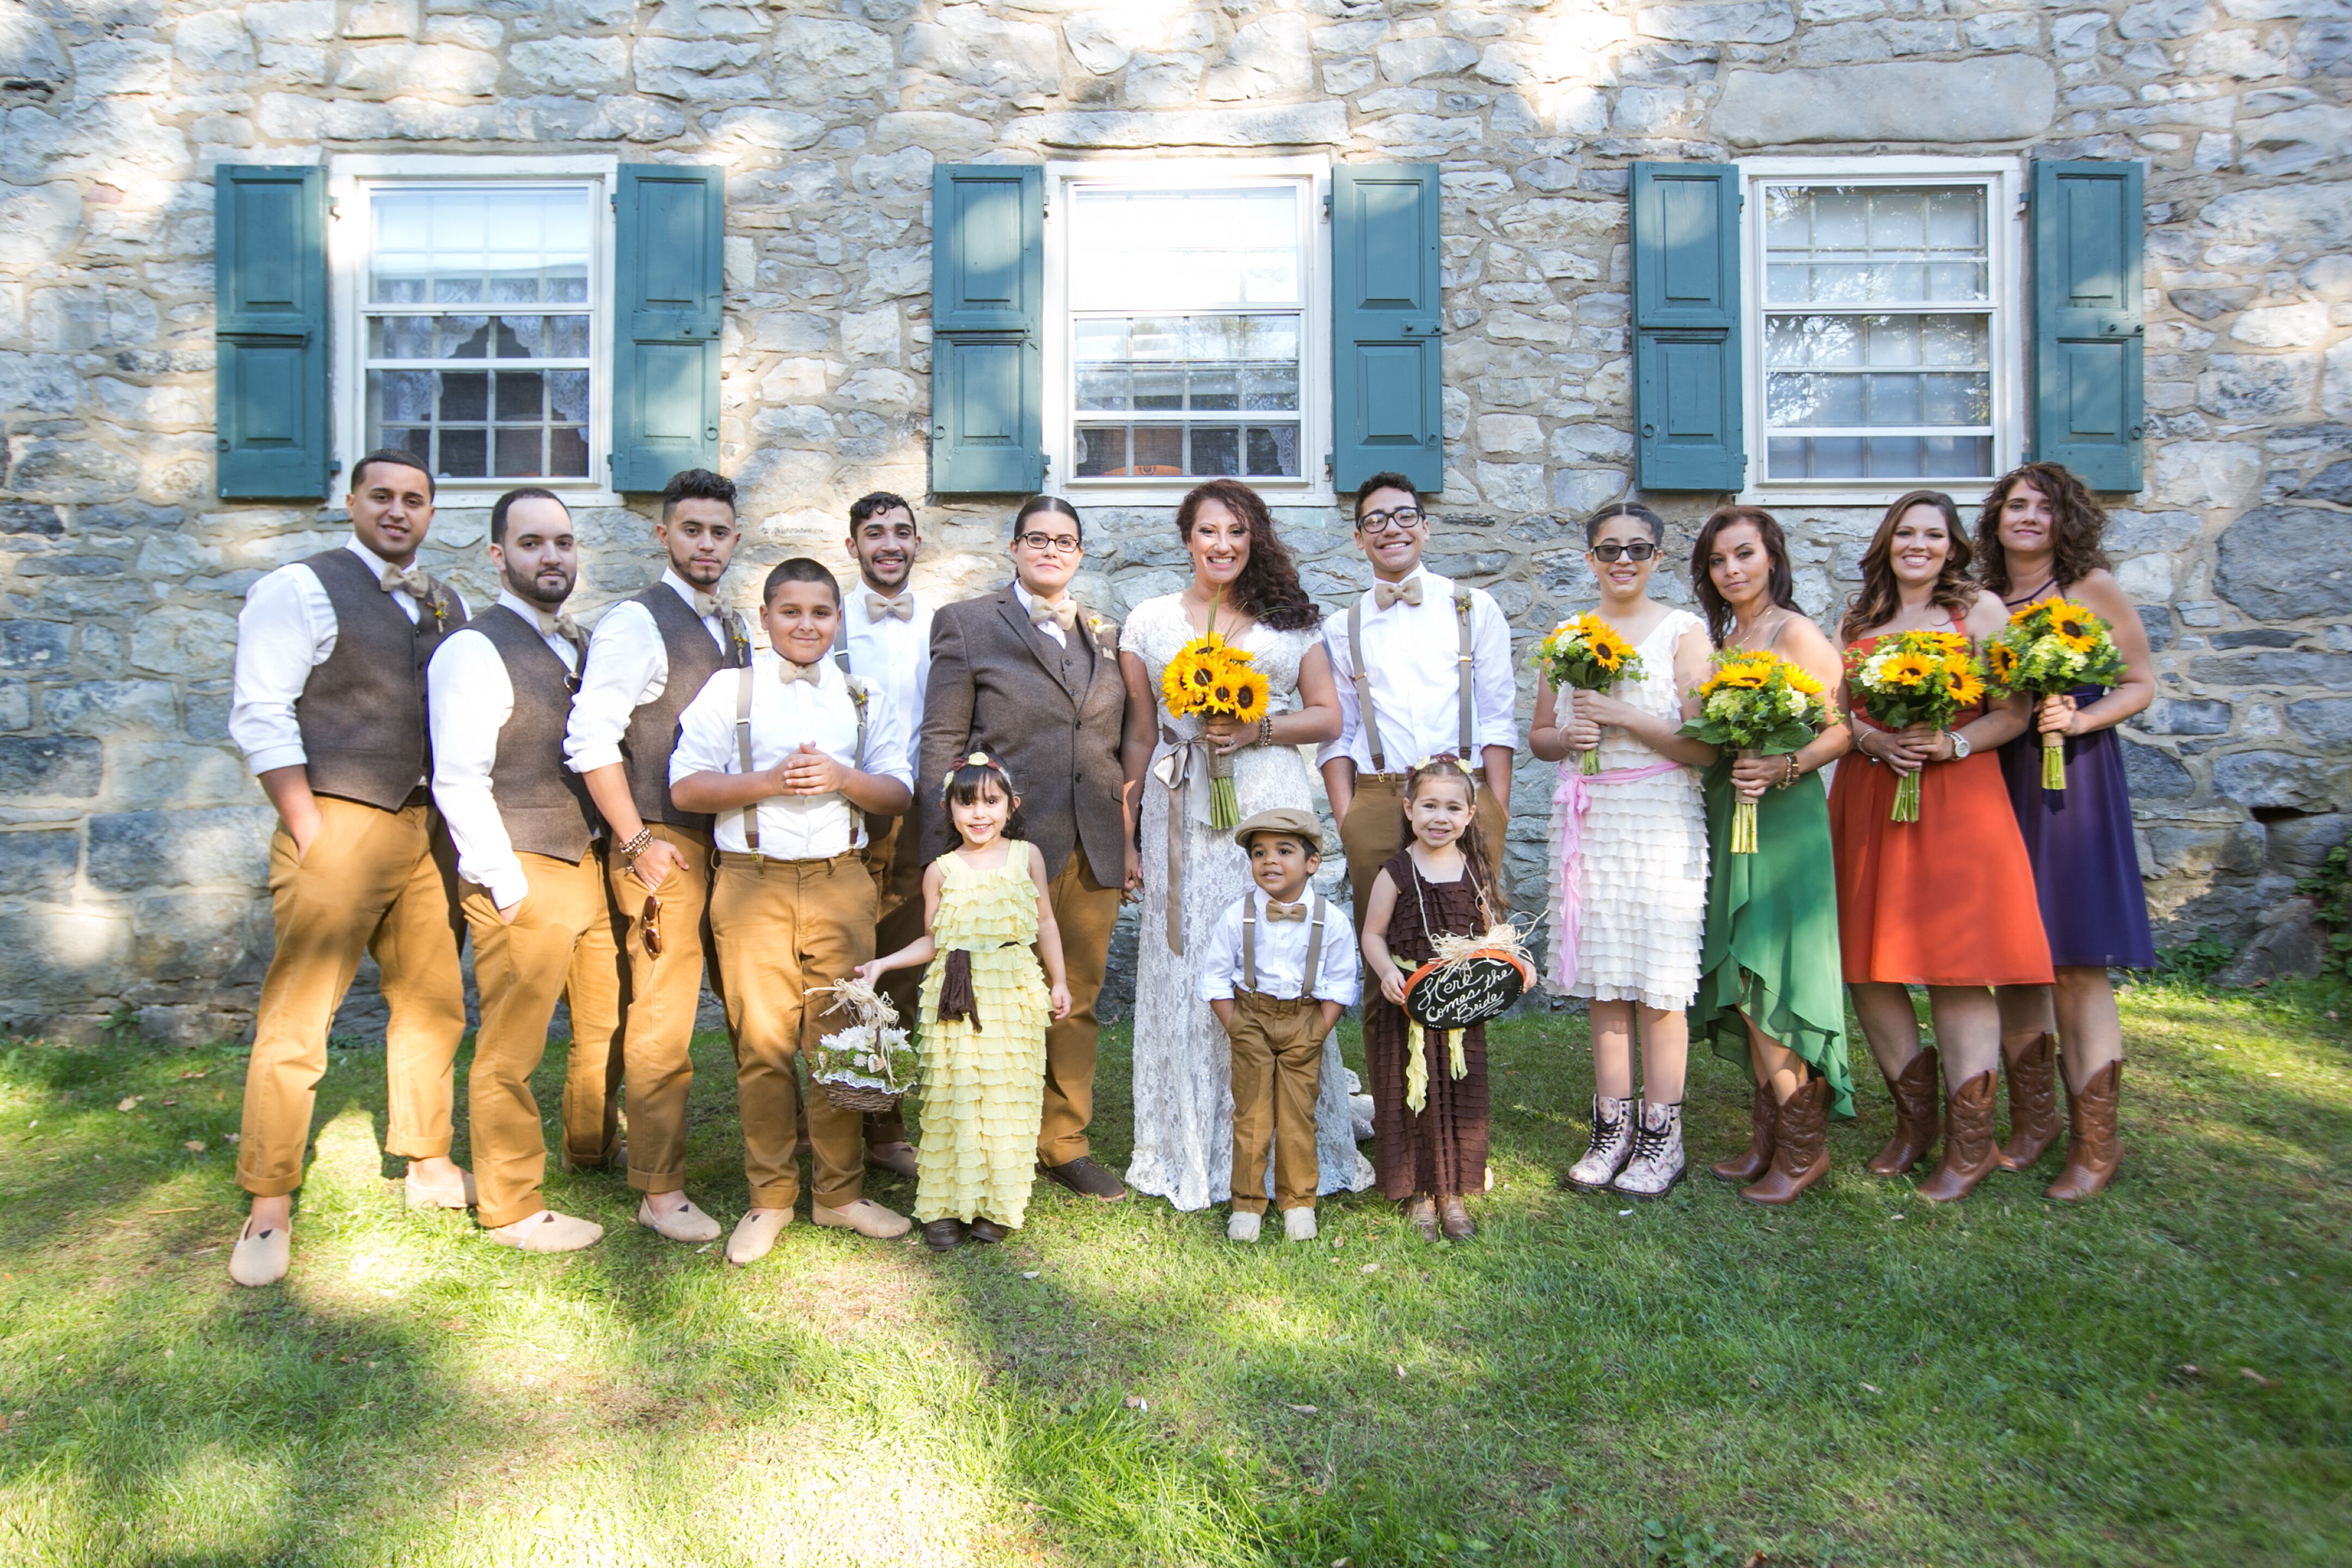 Rustic and Bright Wedding Party Attire